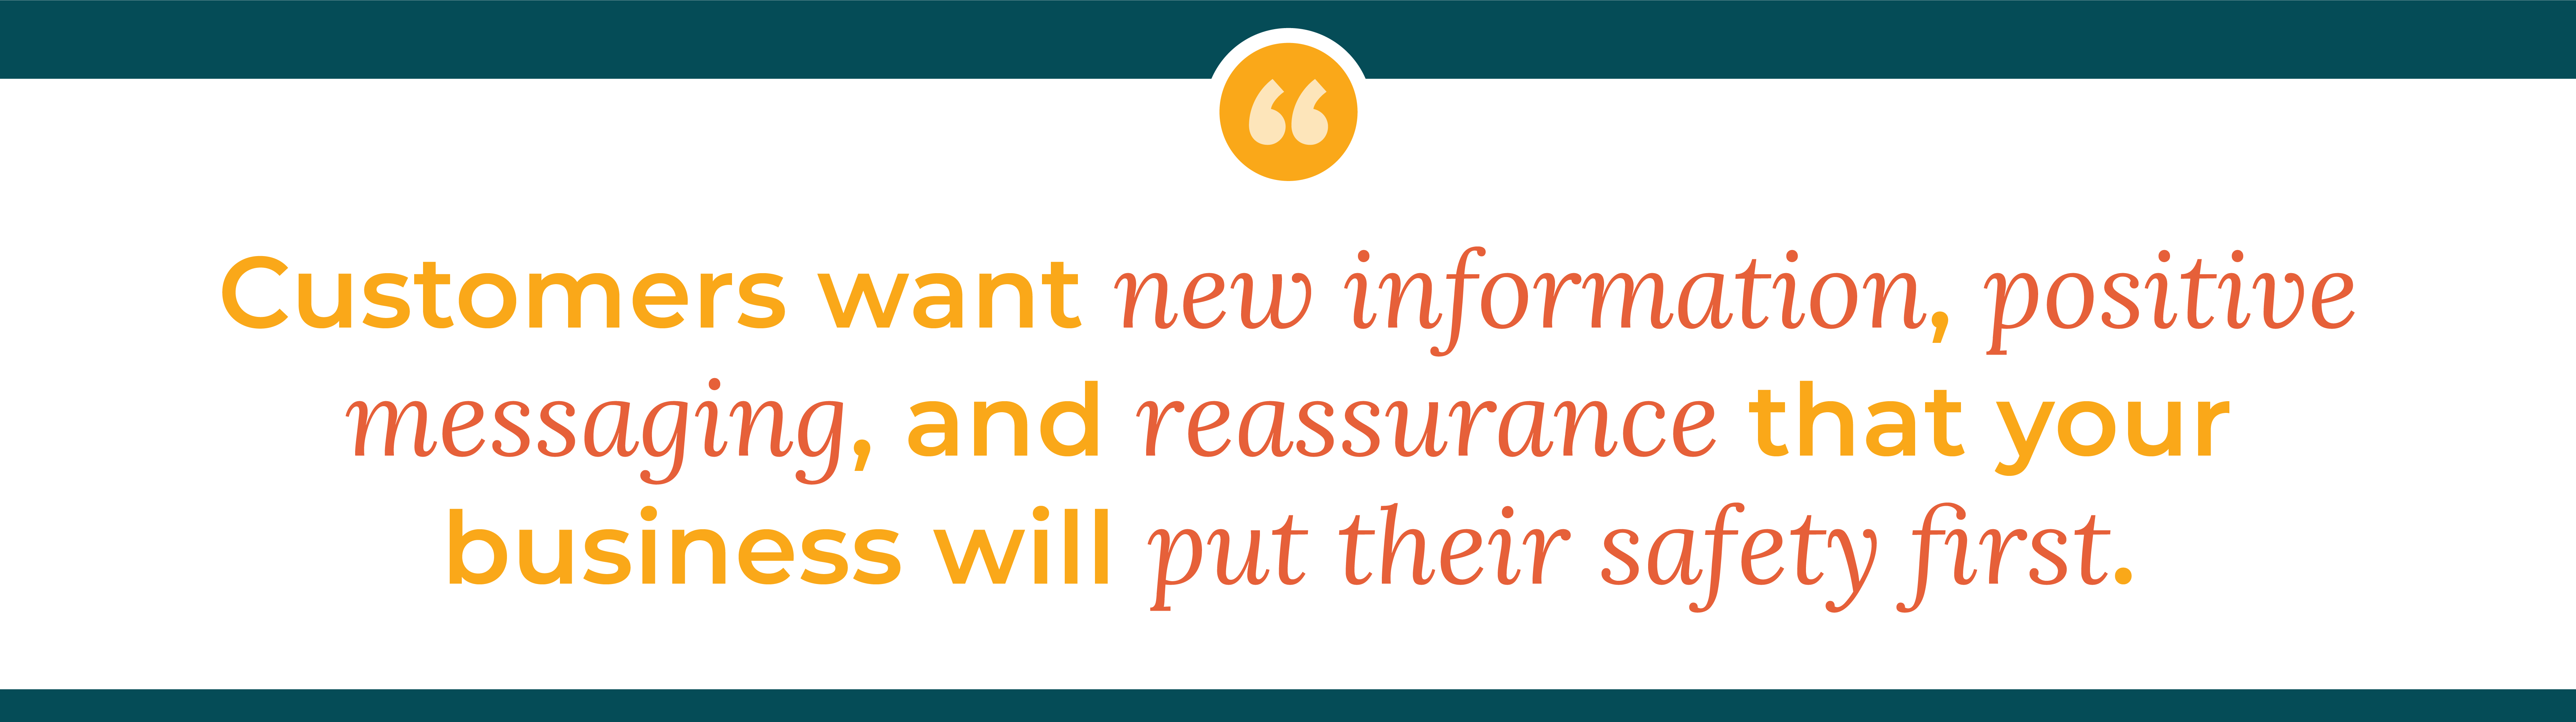 Customers want new information quote